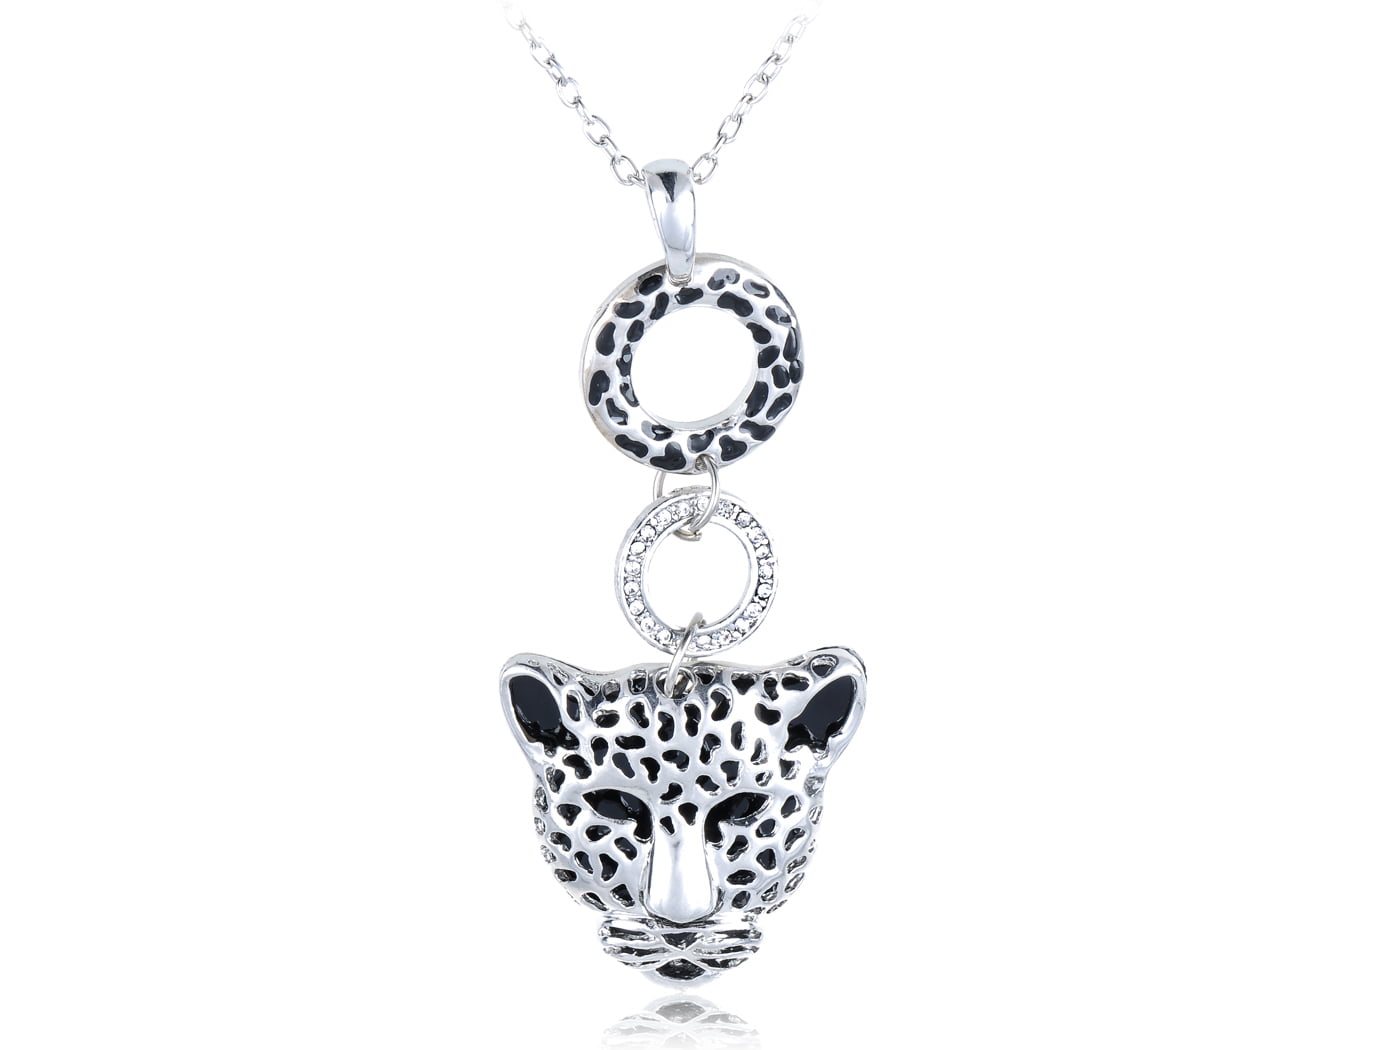 Cheetah Gift Cheetah Necklace Cheetah Jewelry Sterling Silver